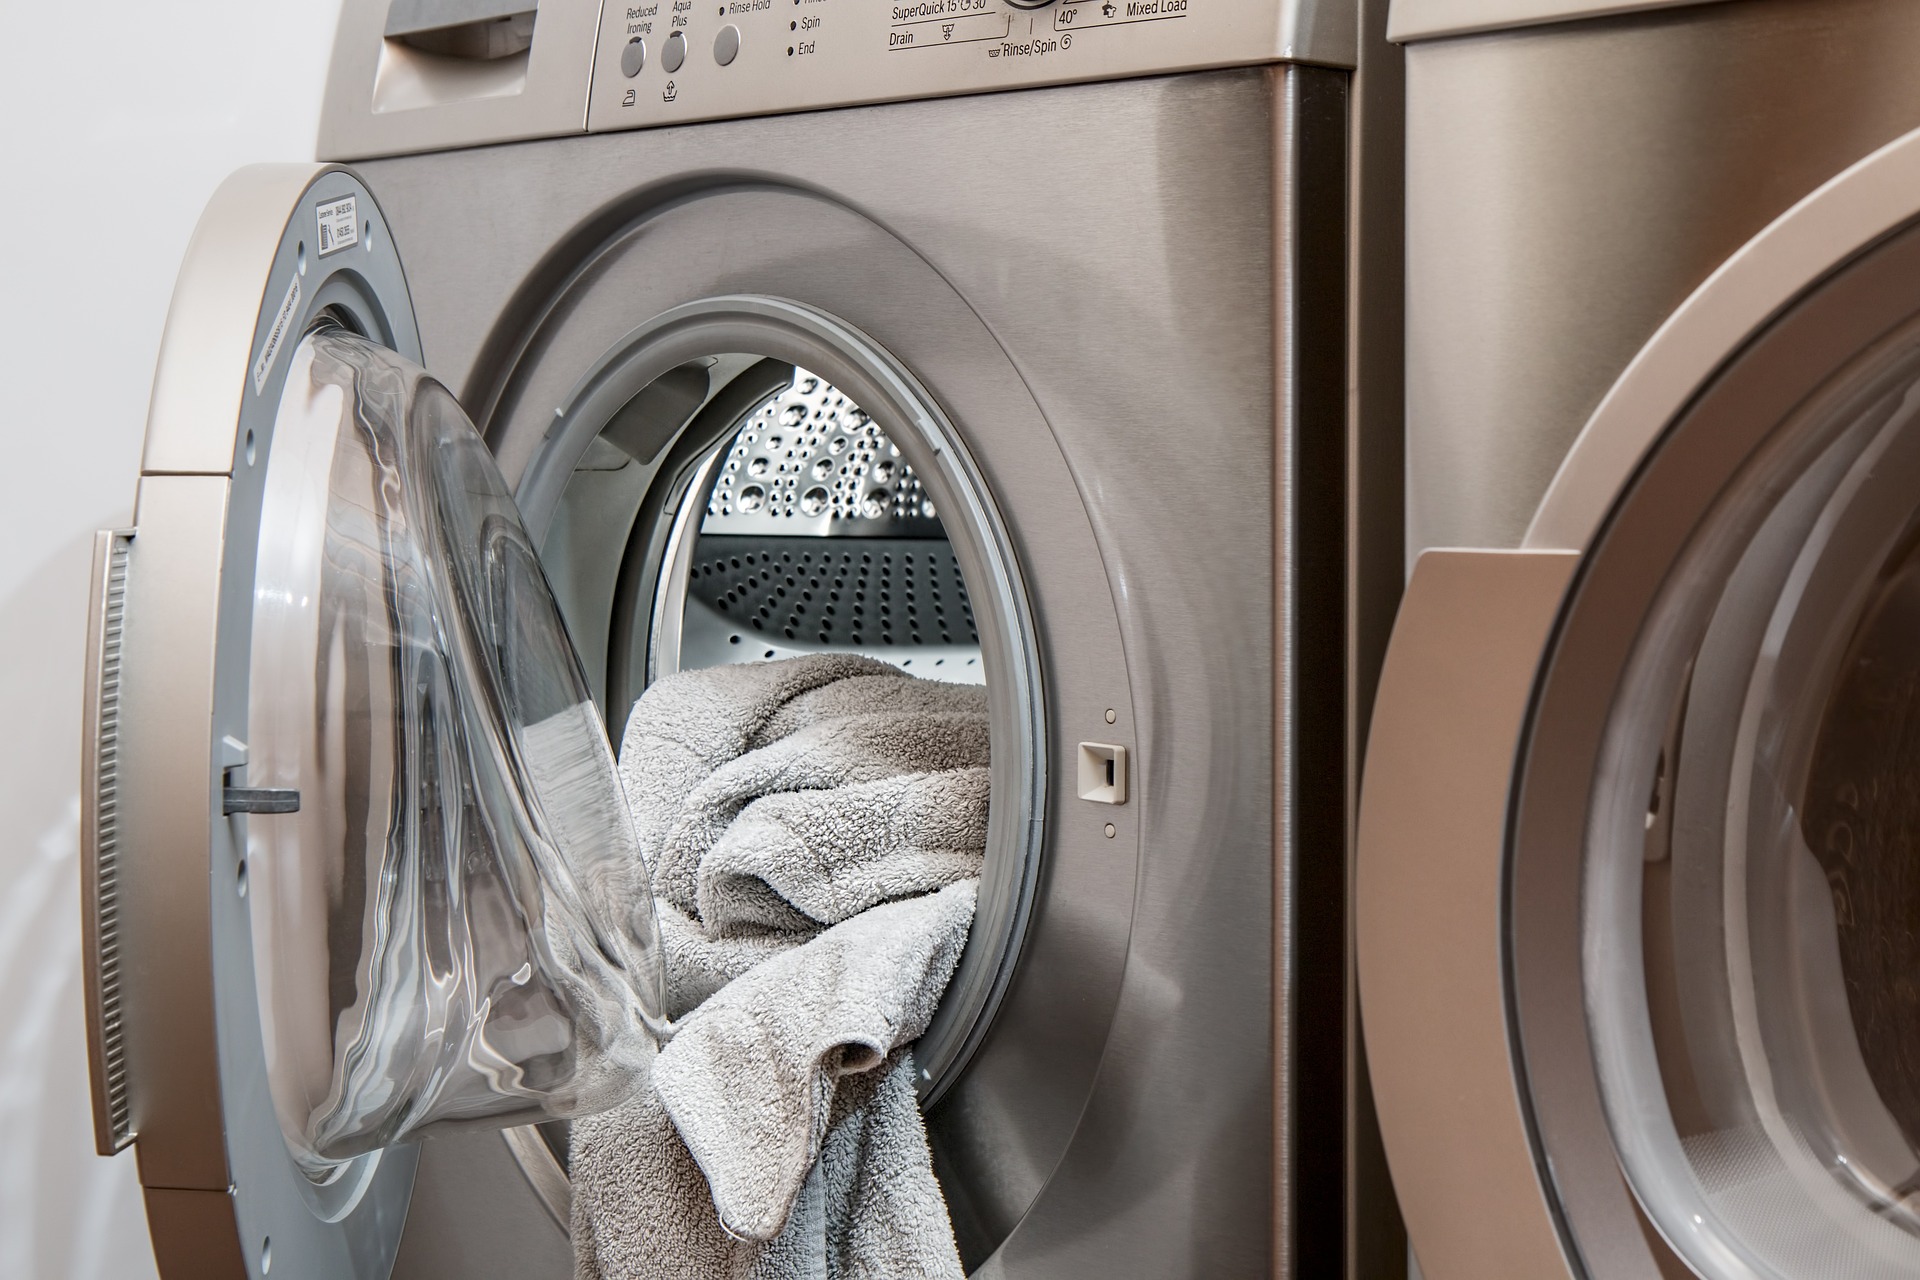 Repairing a Washing Machine That Won’t Spin: Step-by-Step Guide